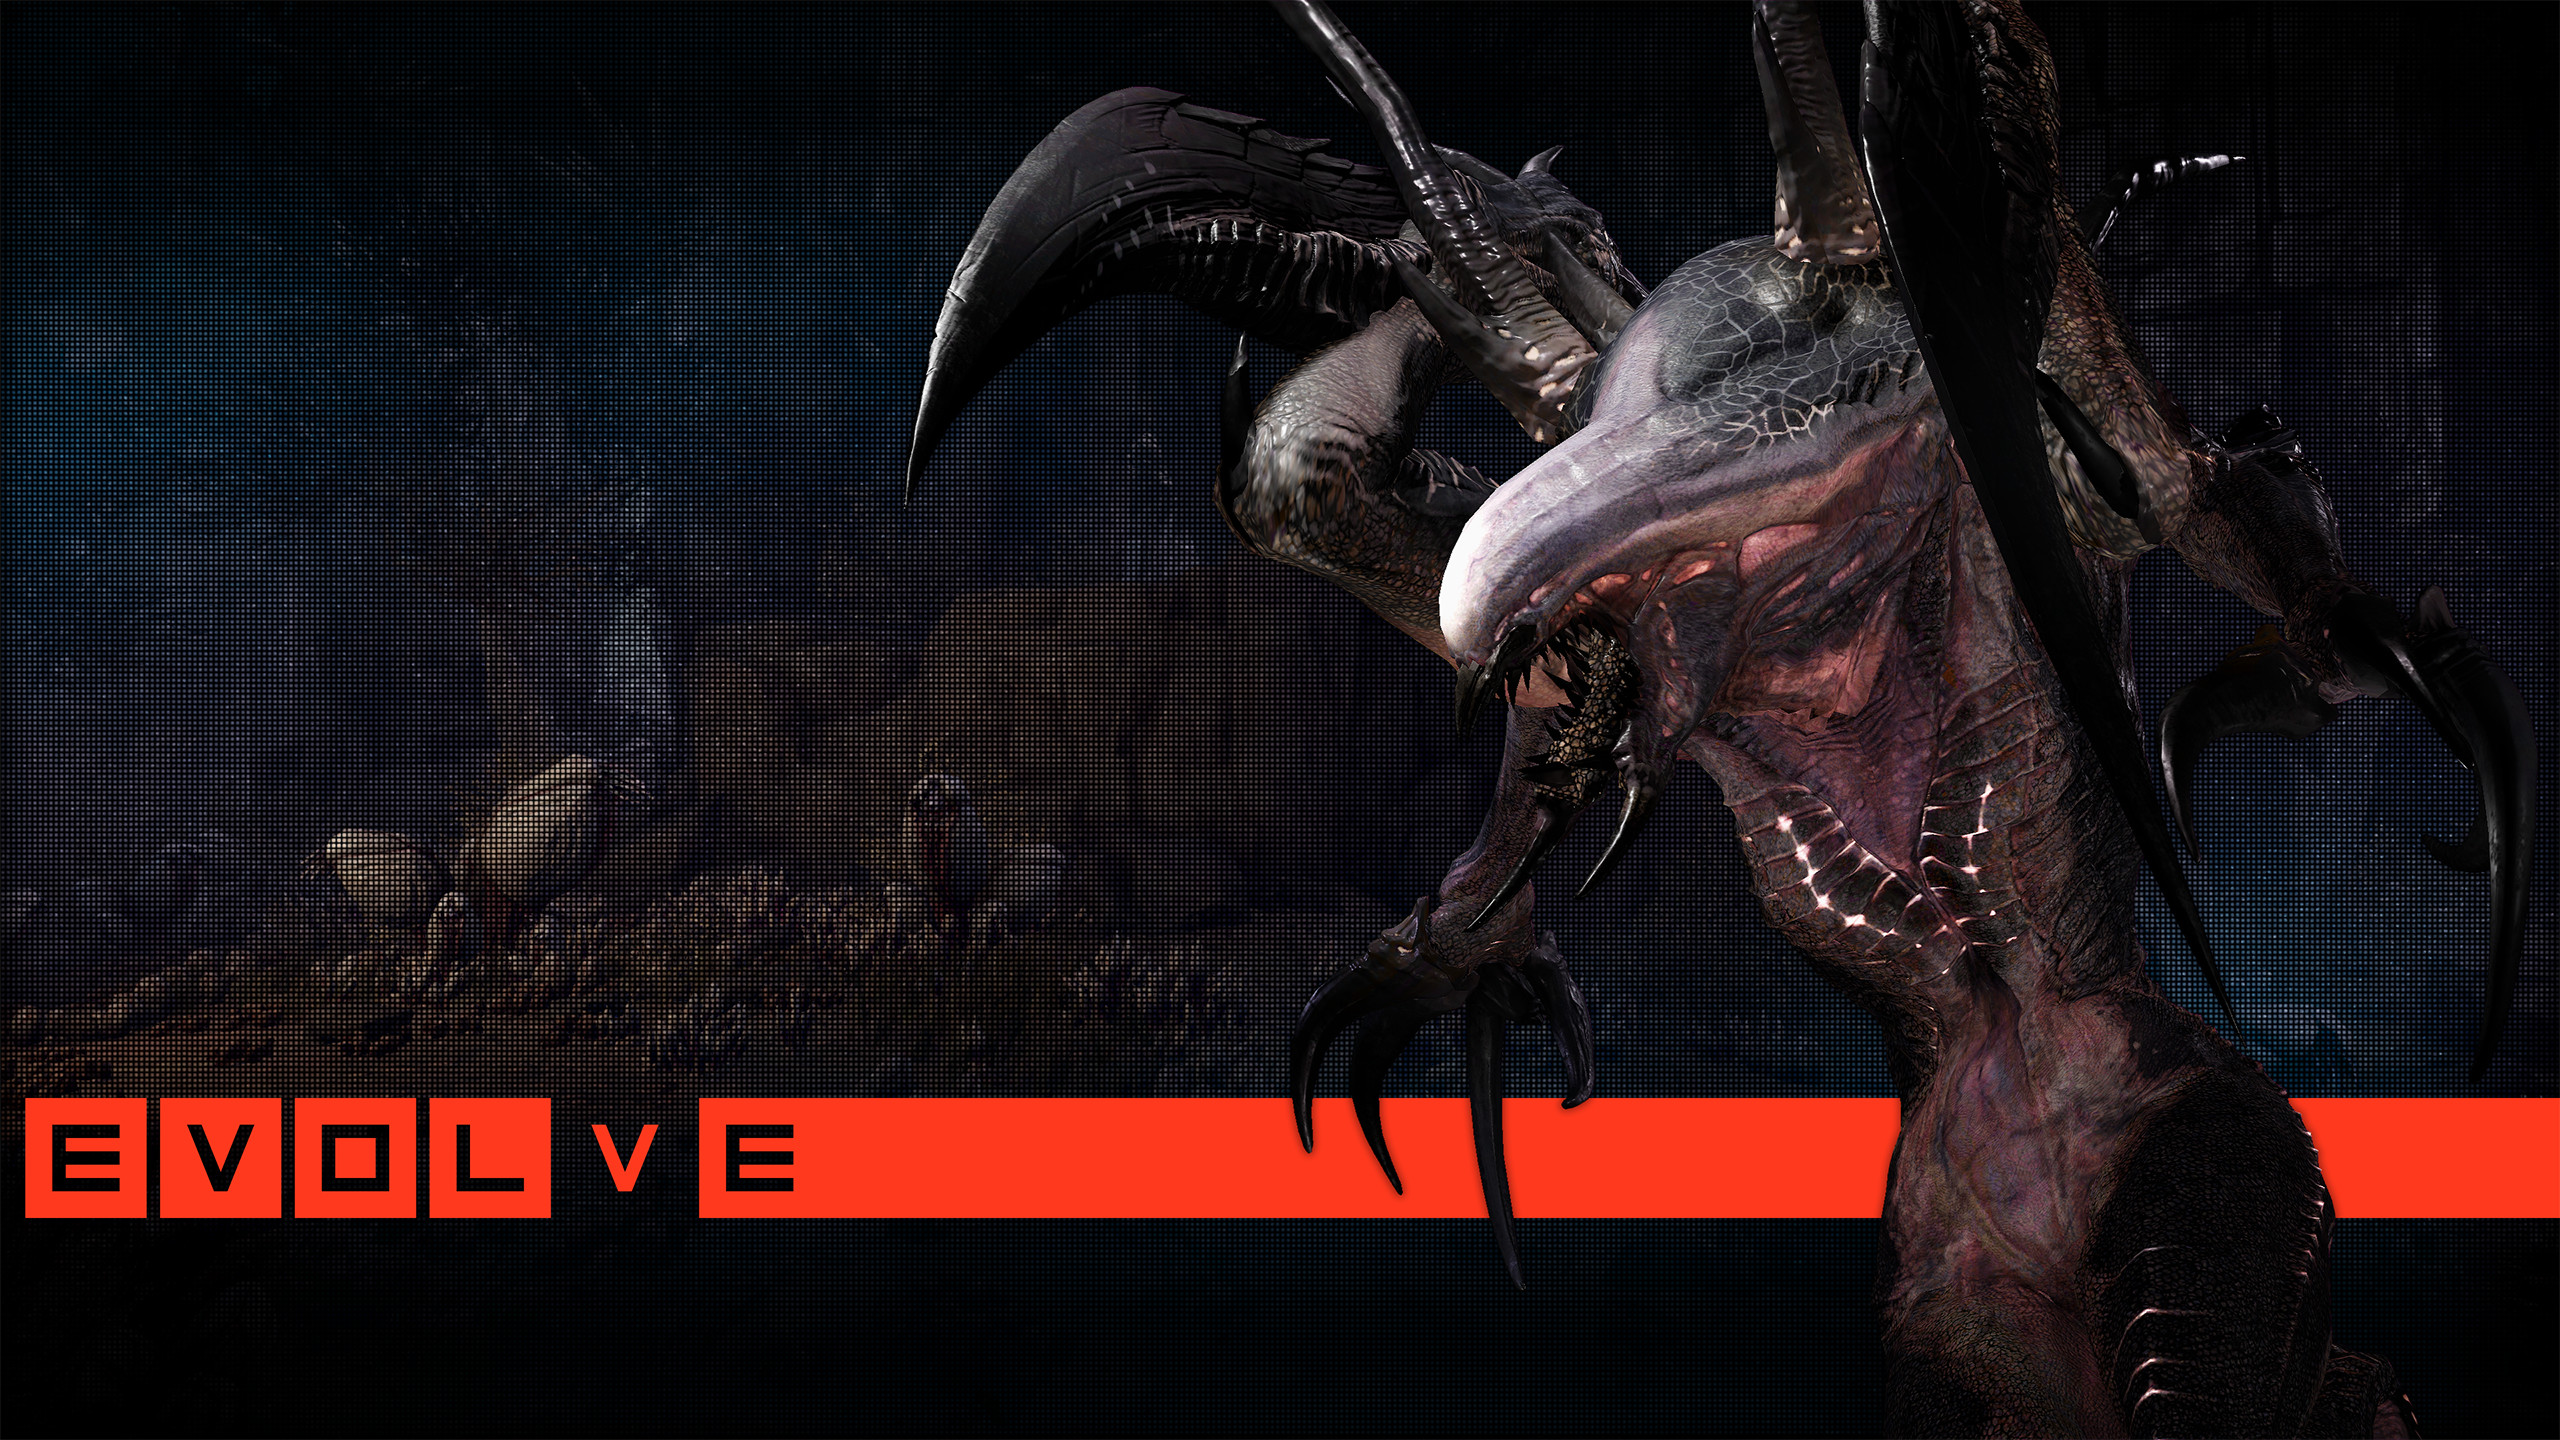 2560x1440 Evolve Wallpapers